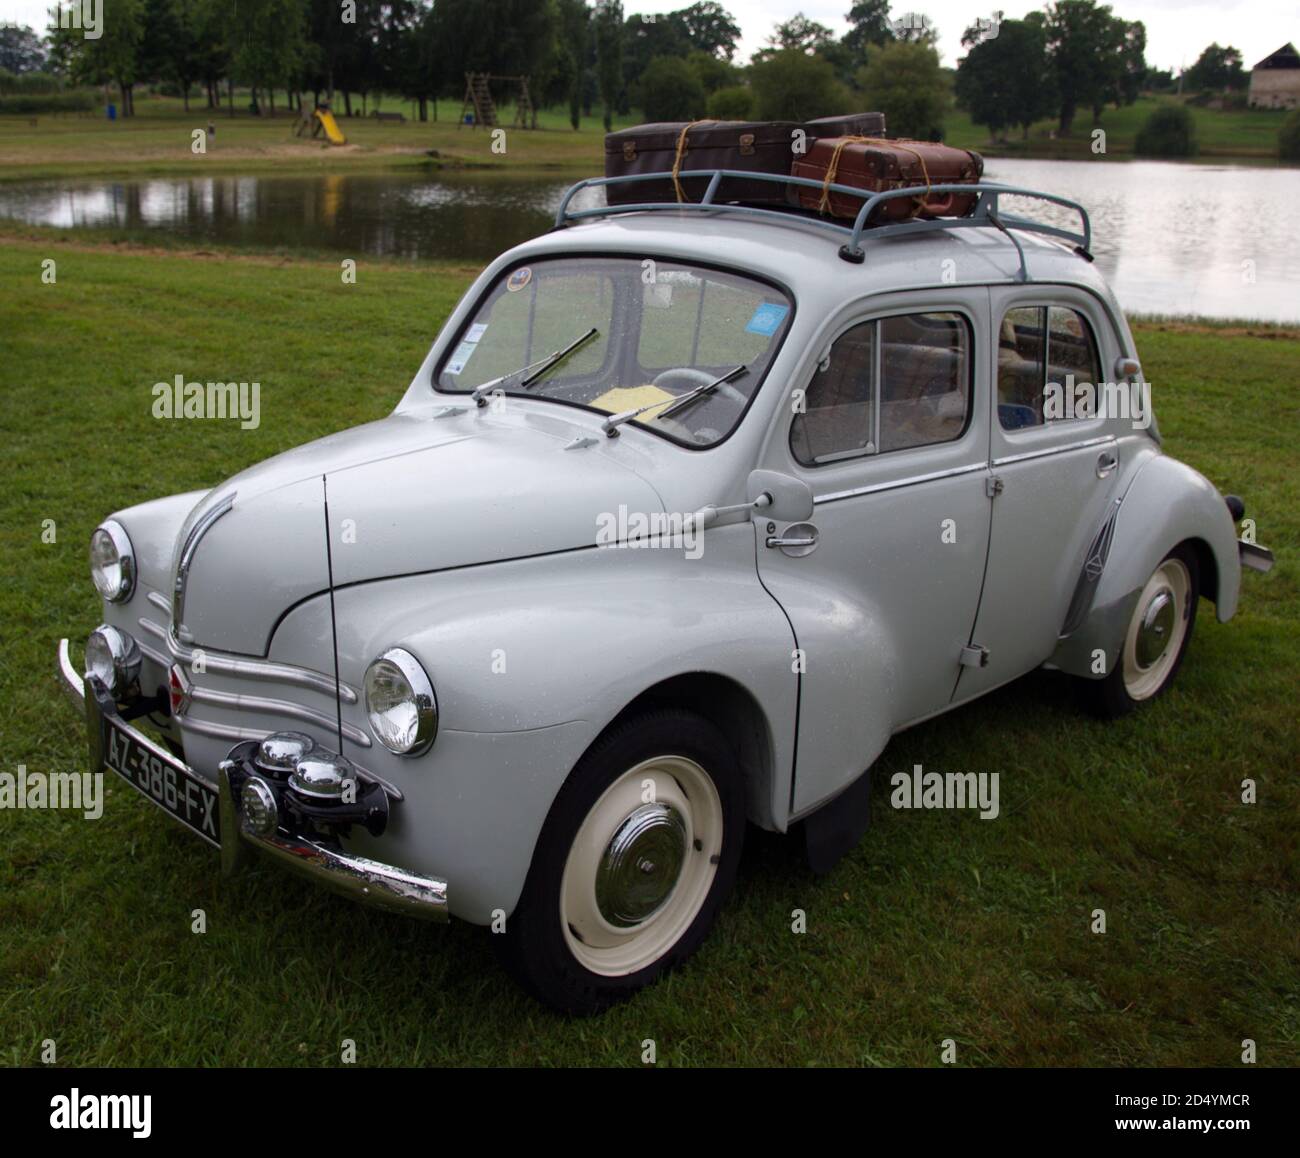 Renault 4CV vintage French car in     France Stock Photo